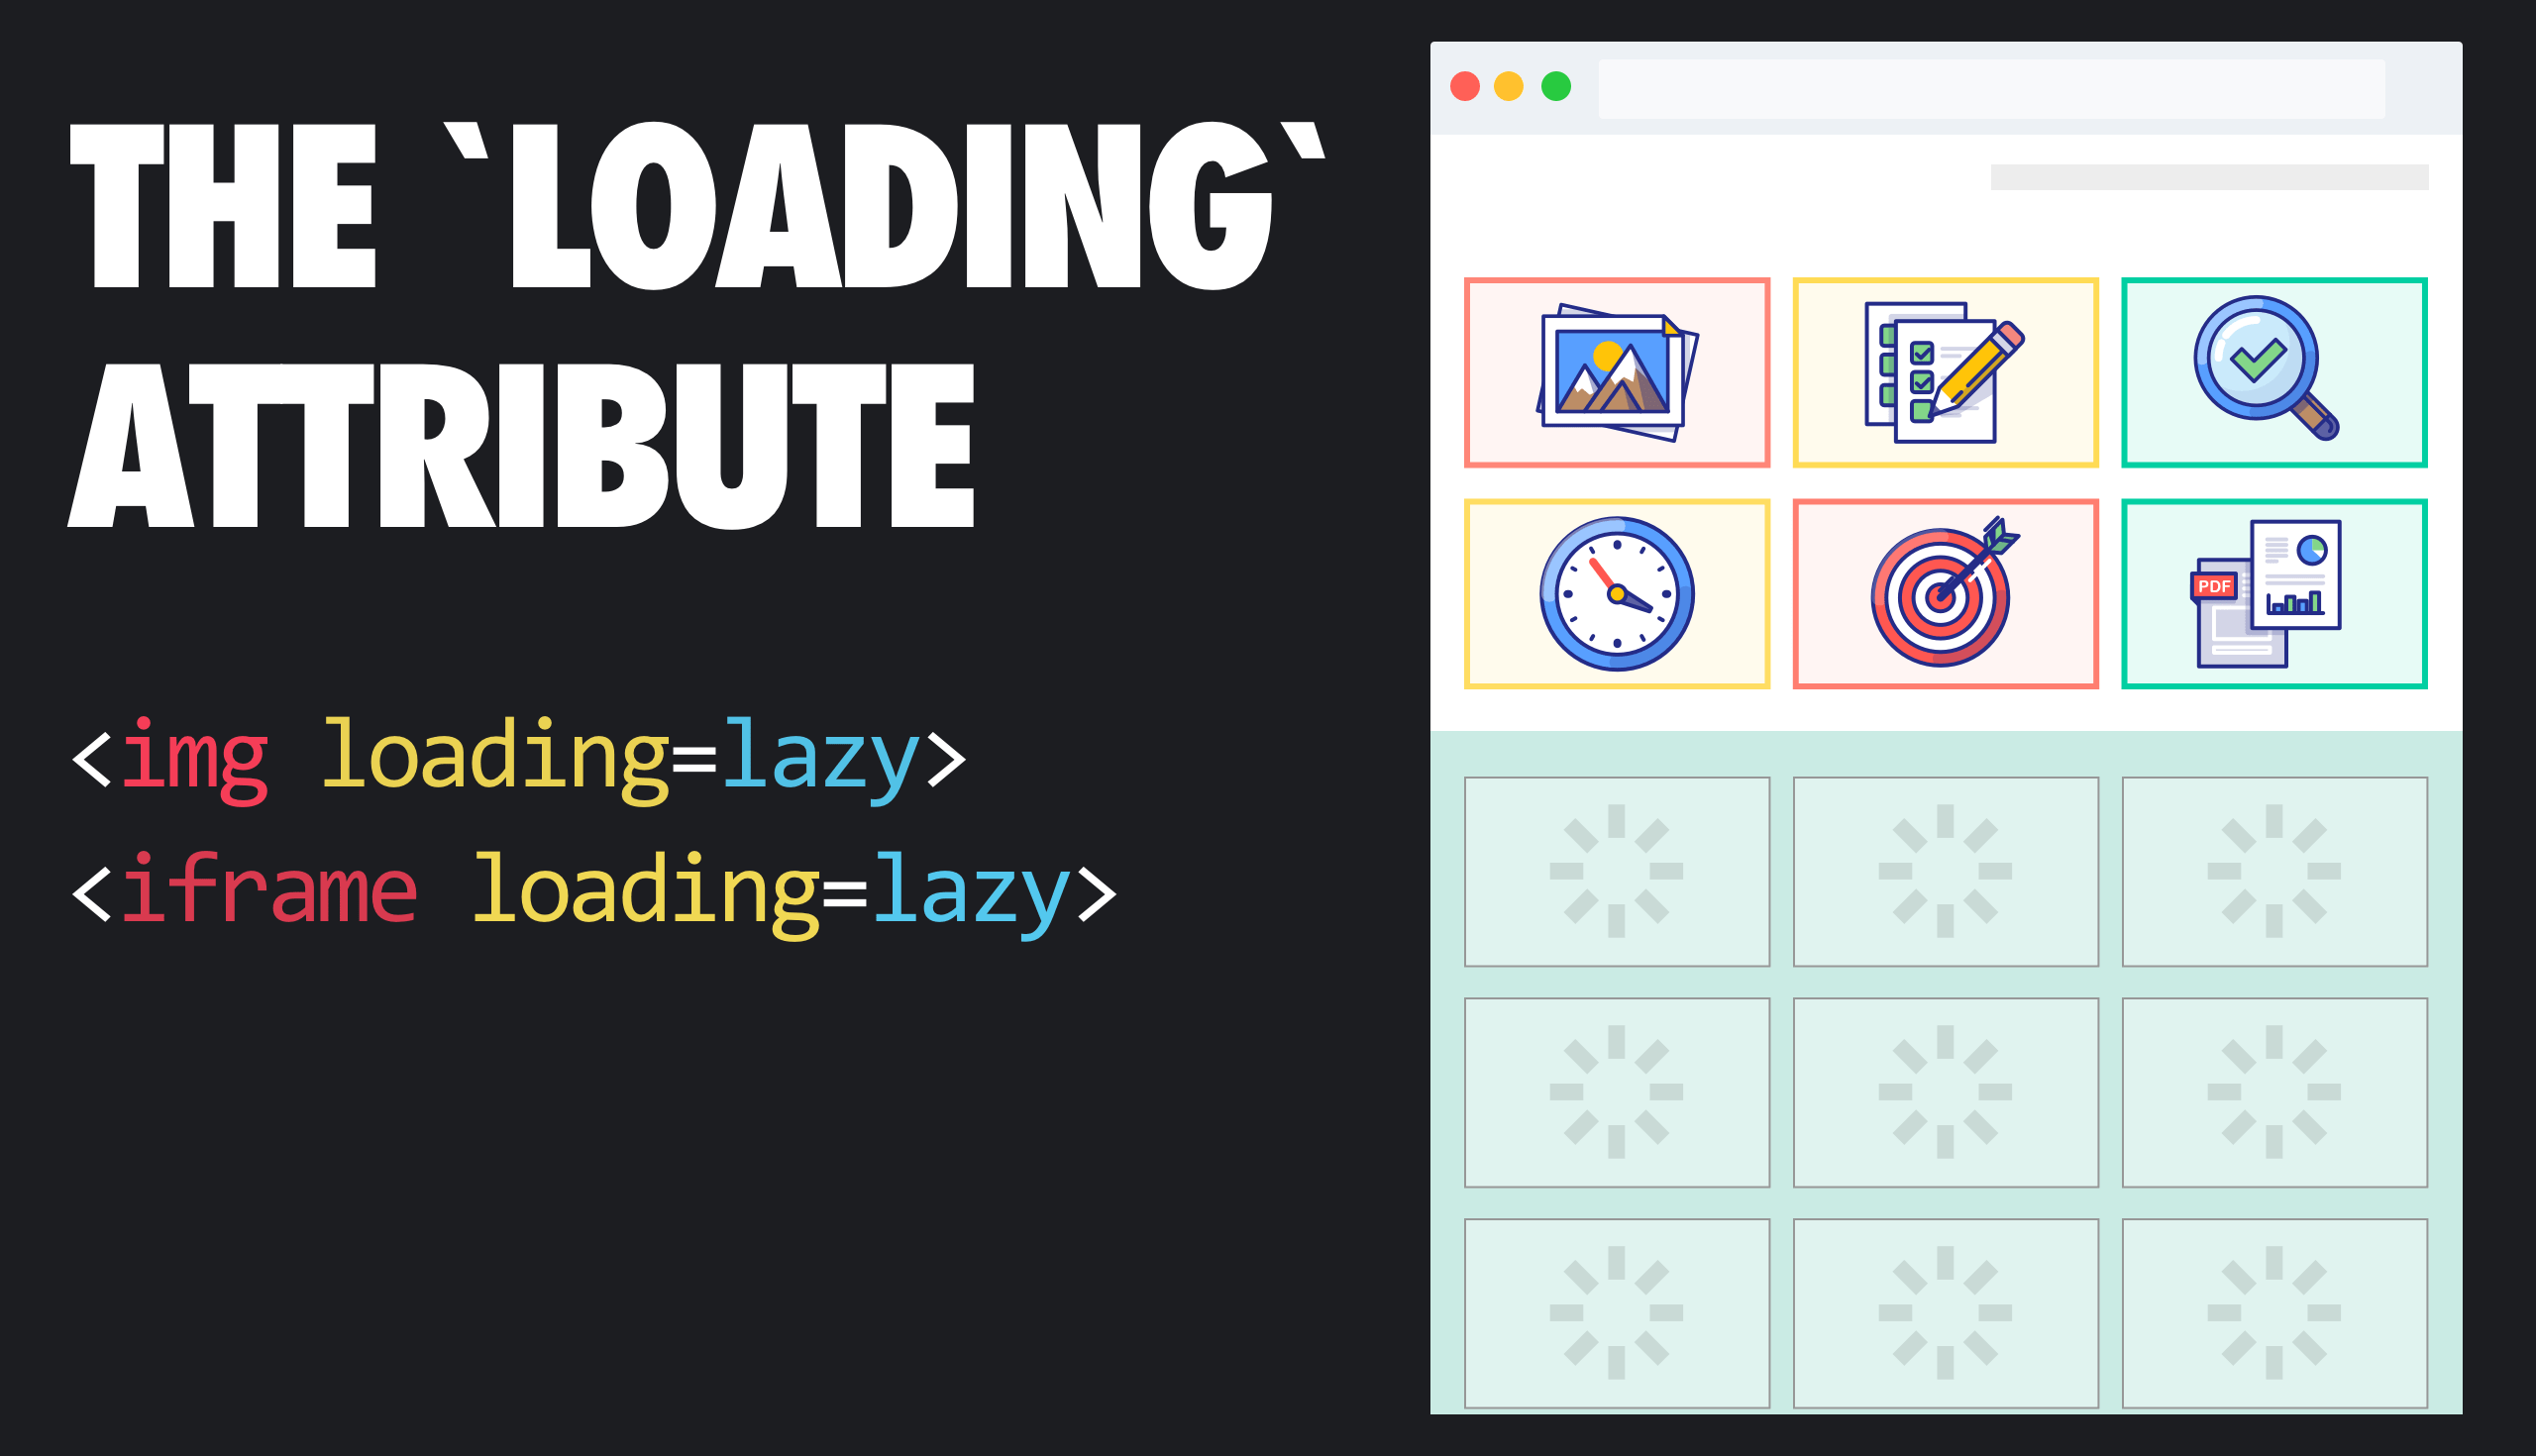 loading-attribute@2x.png